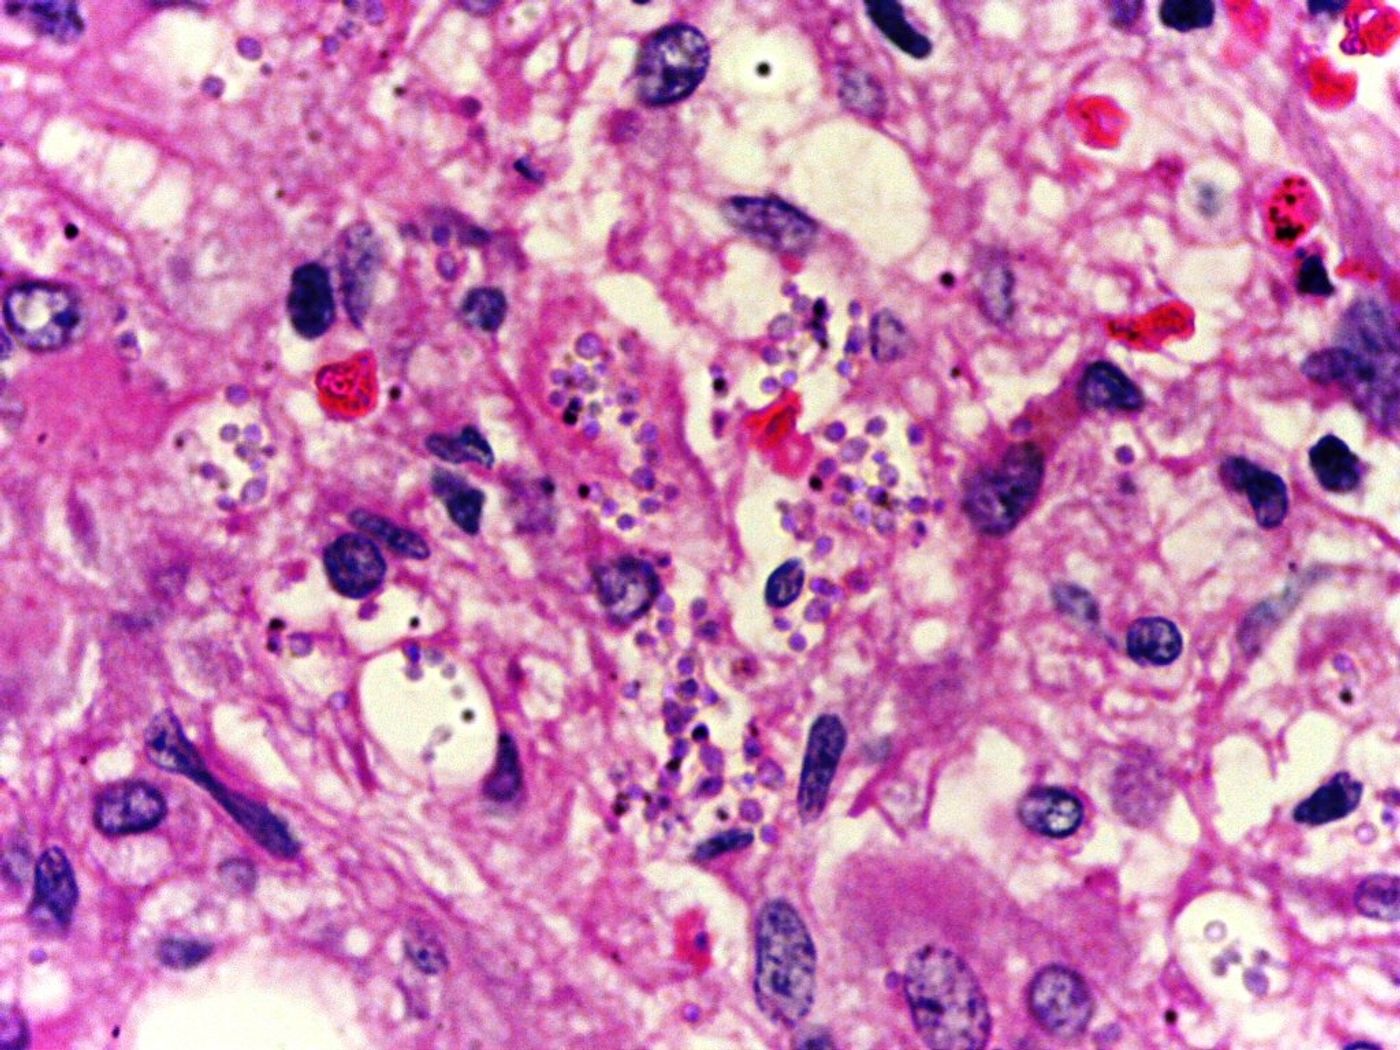 High power image of nuclei with amastigote forms of Leishmaniasis. Source: Calicut Medical COllege